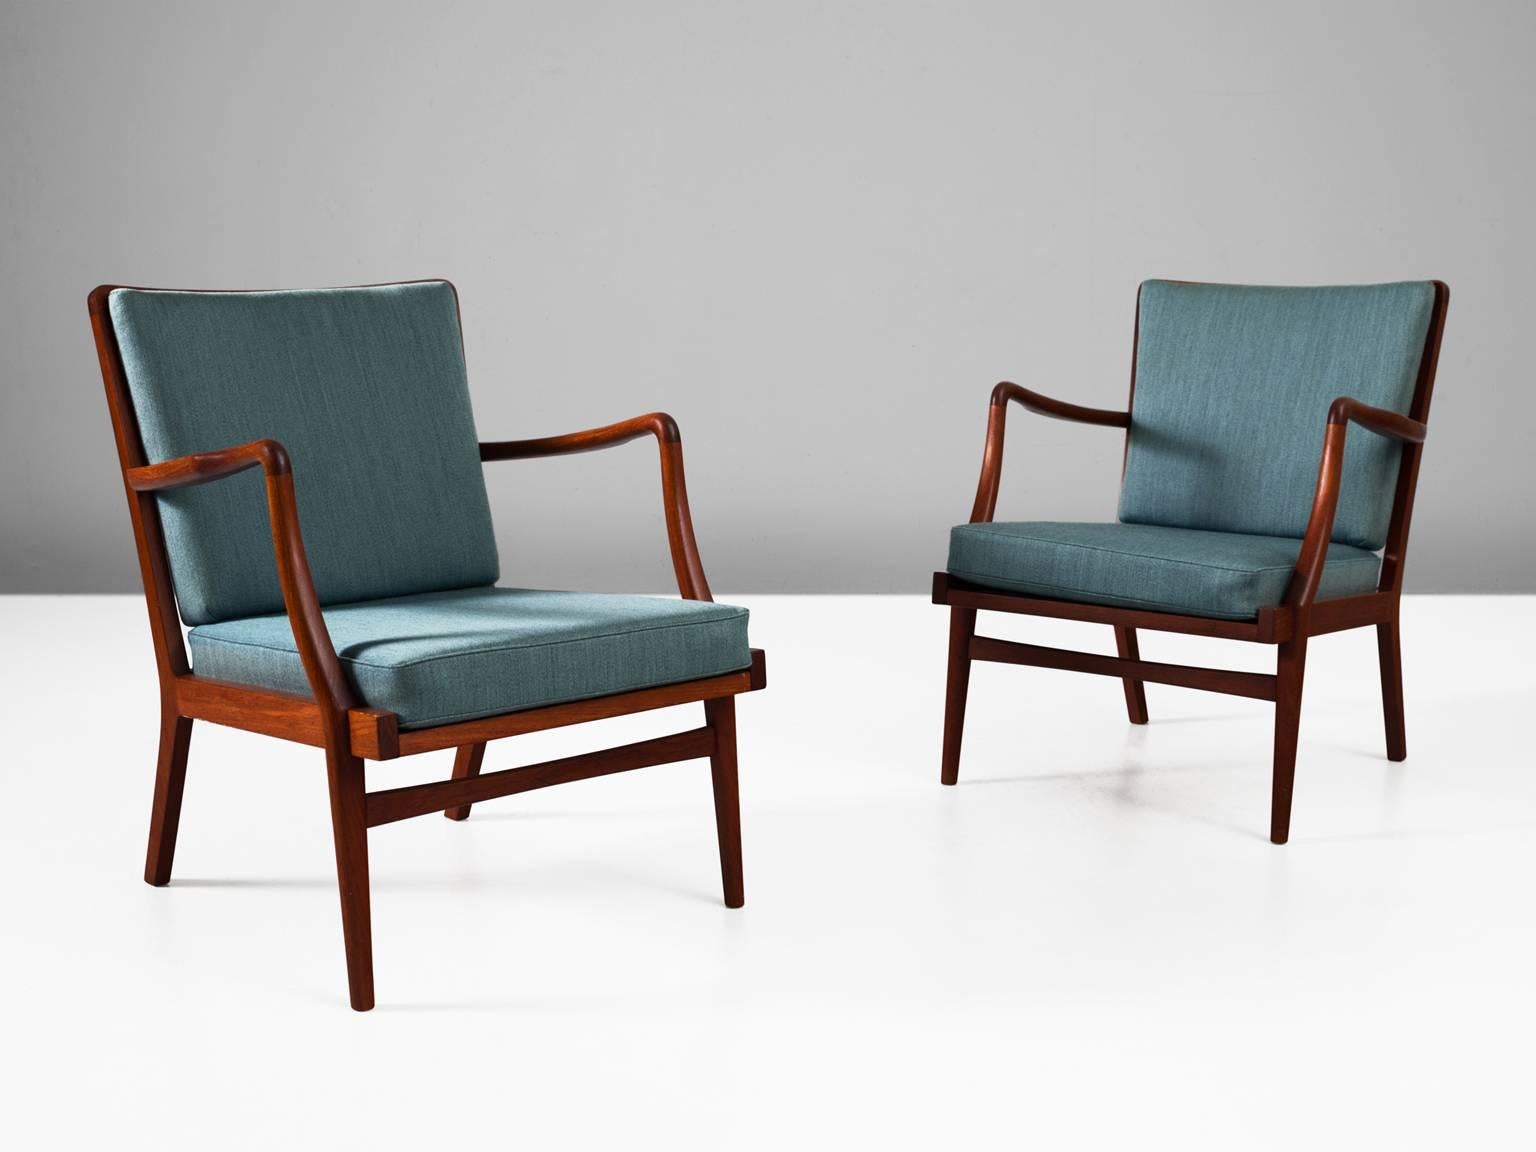 Set of two armchairs, in teak and fabric, by Peder Christensen for Jørgen Christensen, Denmark, 1950s. 

Pair of Solid Teak Lounge Chairs designed by Peder Christensen. These two chairs are of high quality, this can be seen by the well-made wood